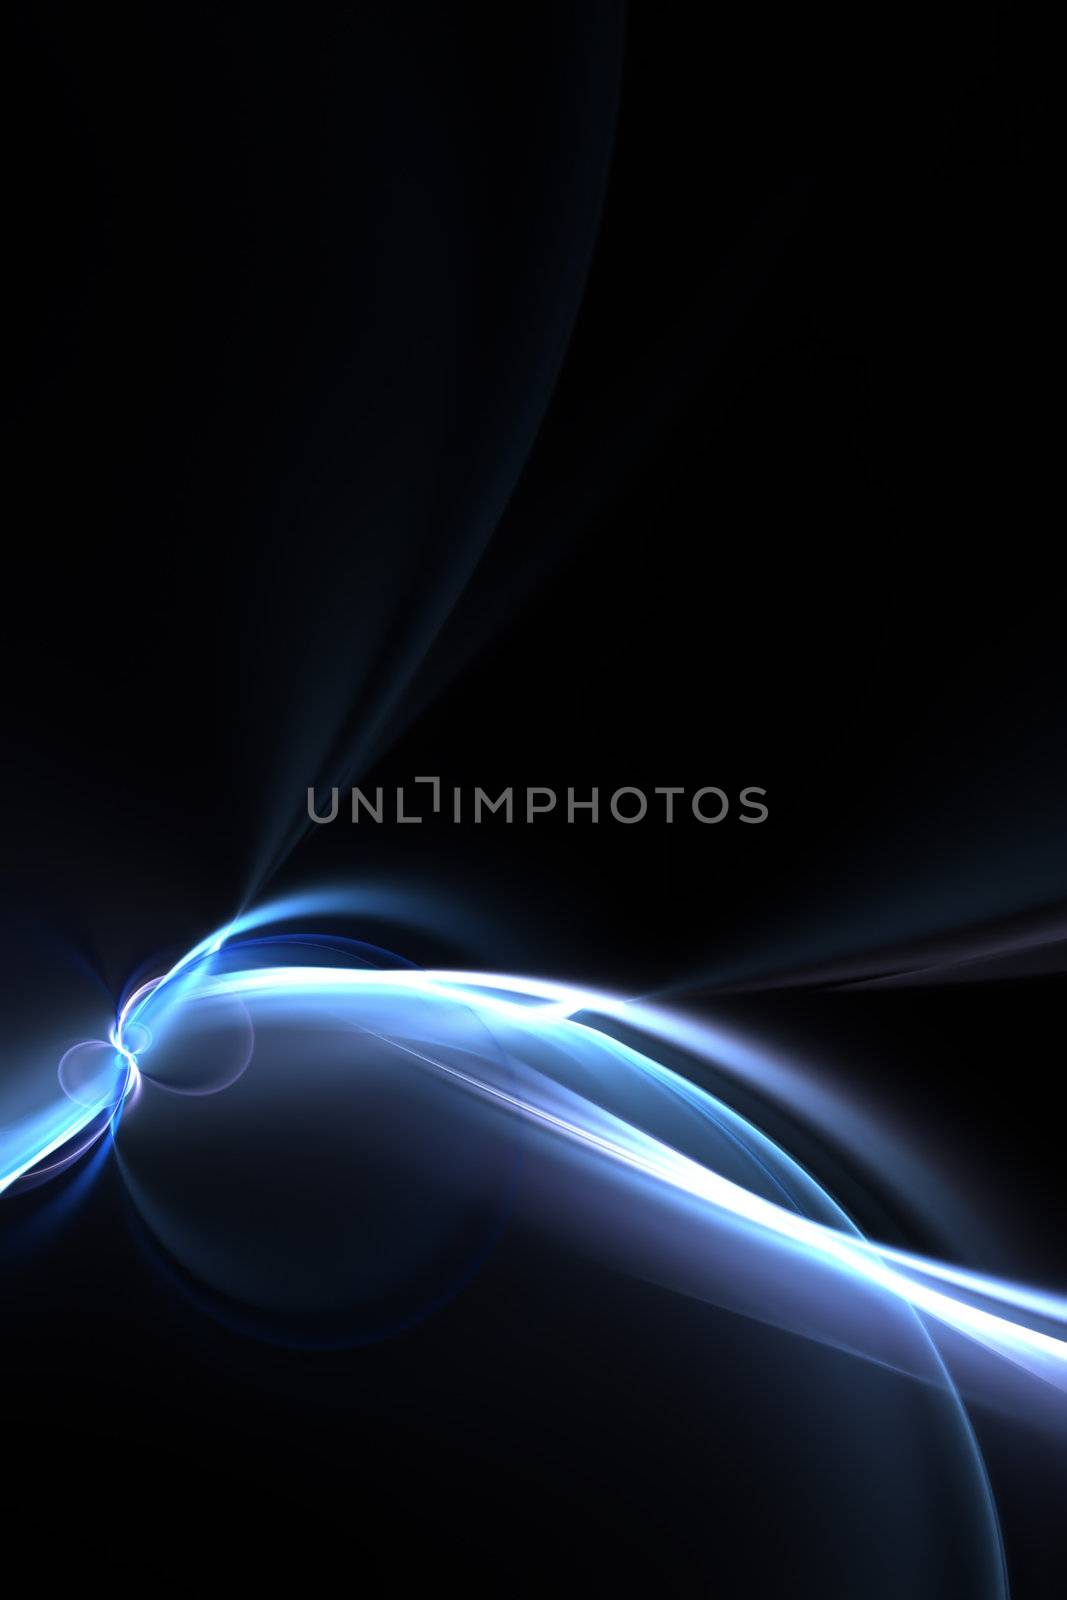 Abstract fluid and plasma like fractal design that works great as a background or backdrop.